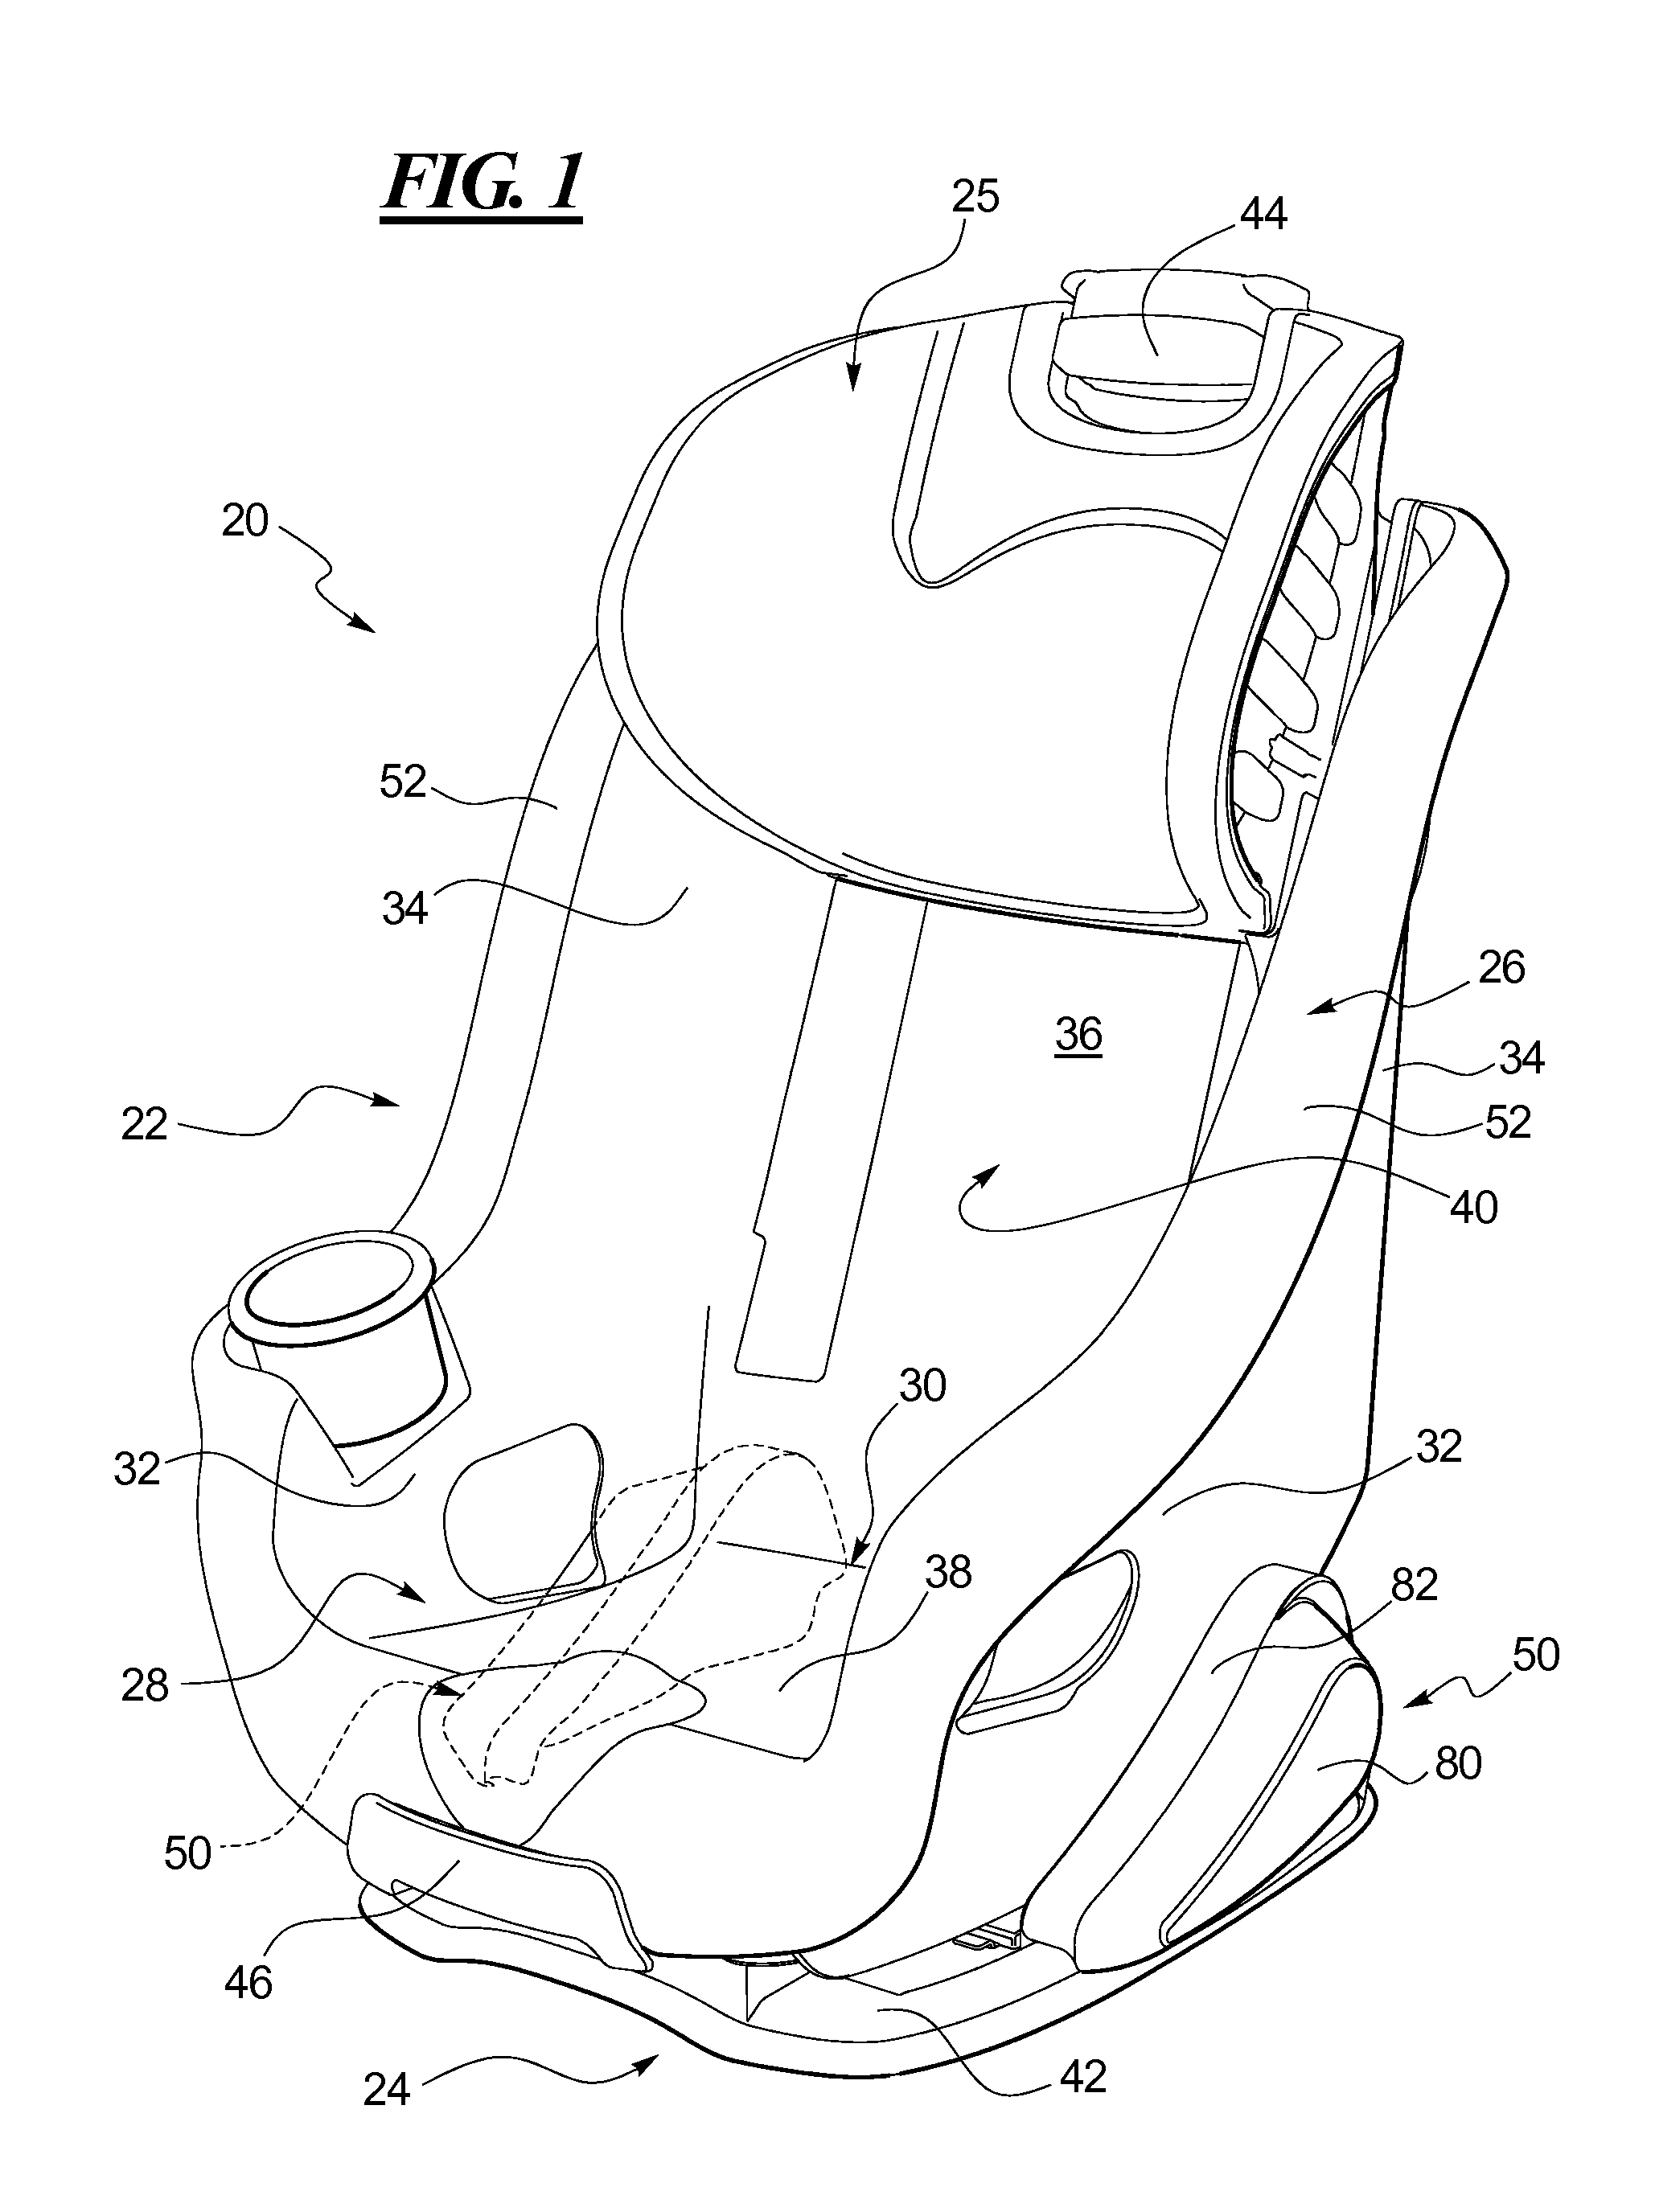 Child safety seat with side impact energy redirection